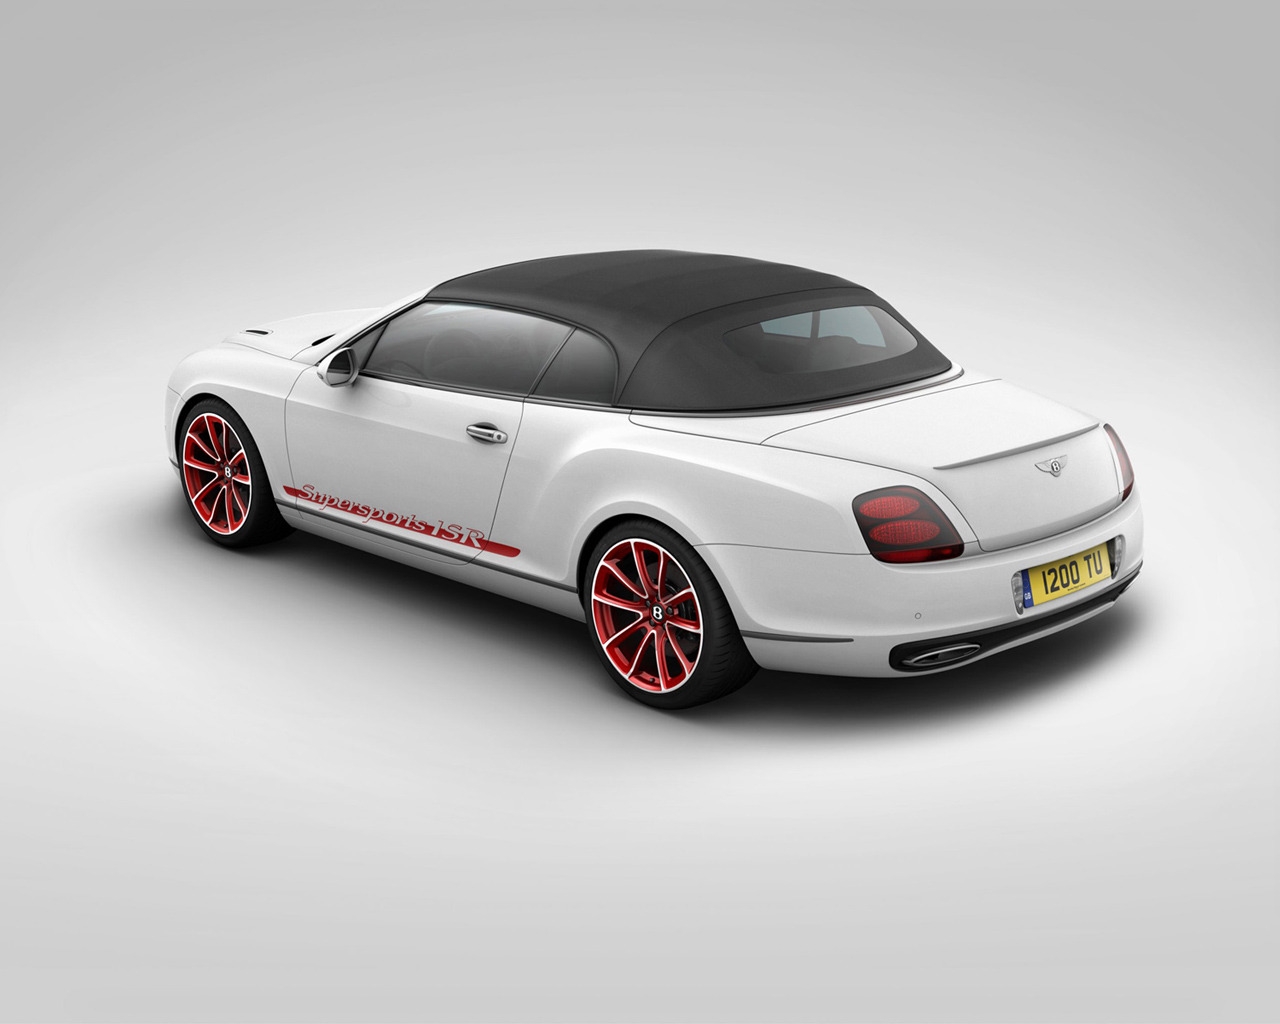 2011 Bentley Continental Convertible for 1280 x 1024 resolution